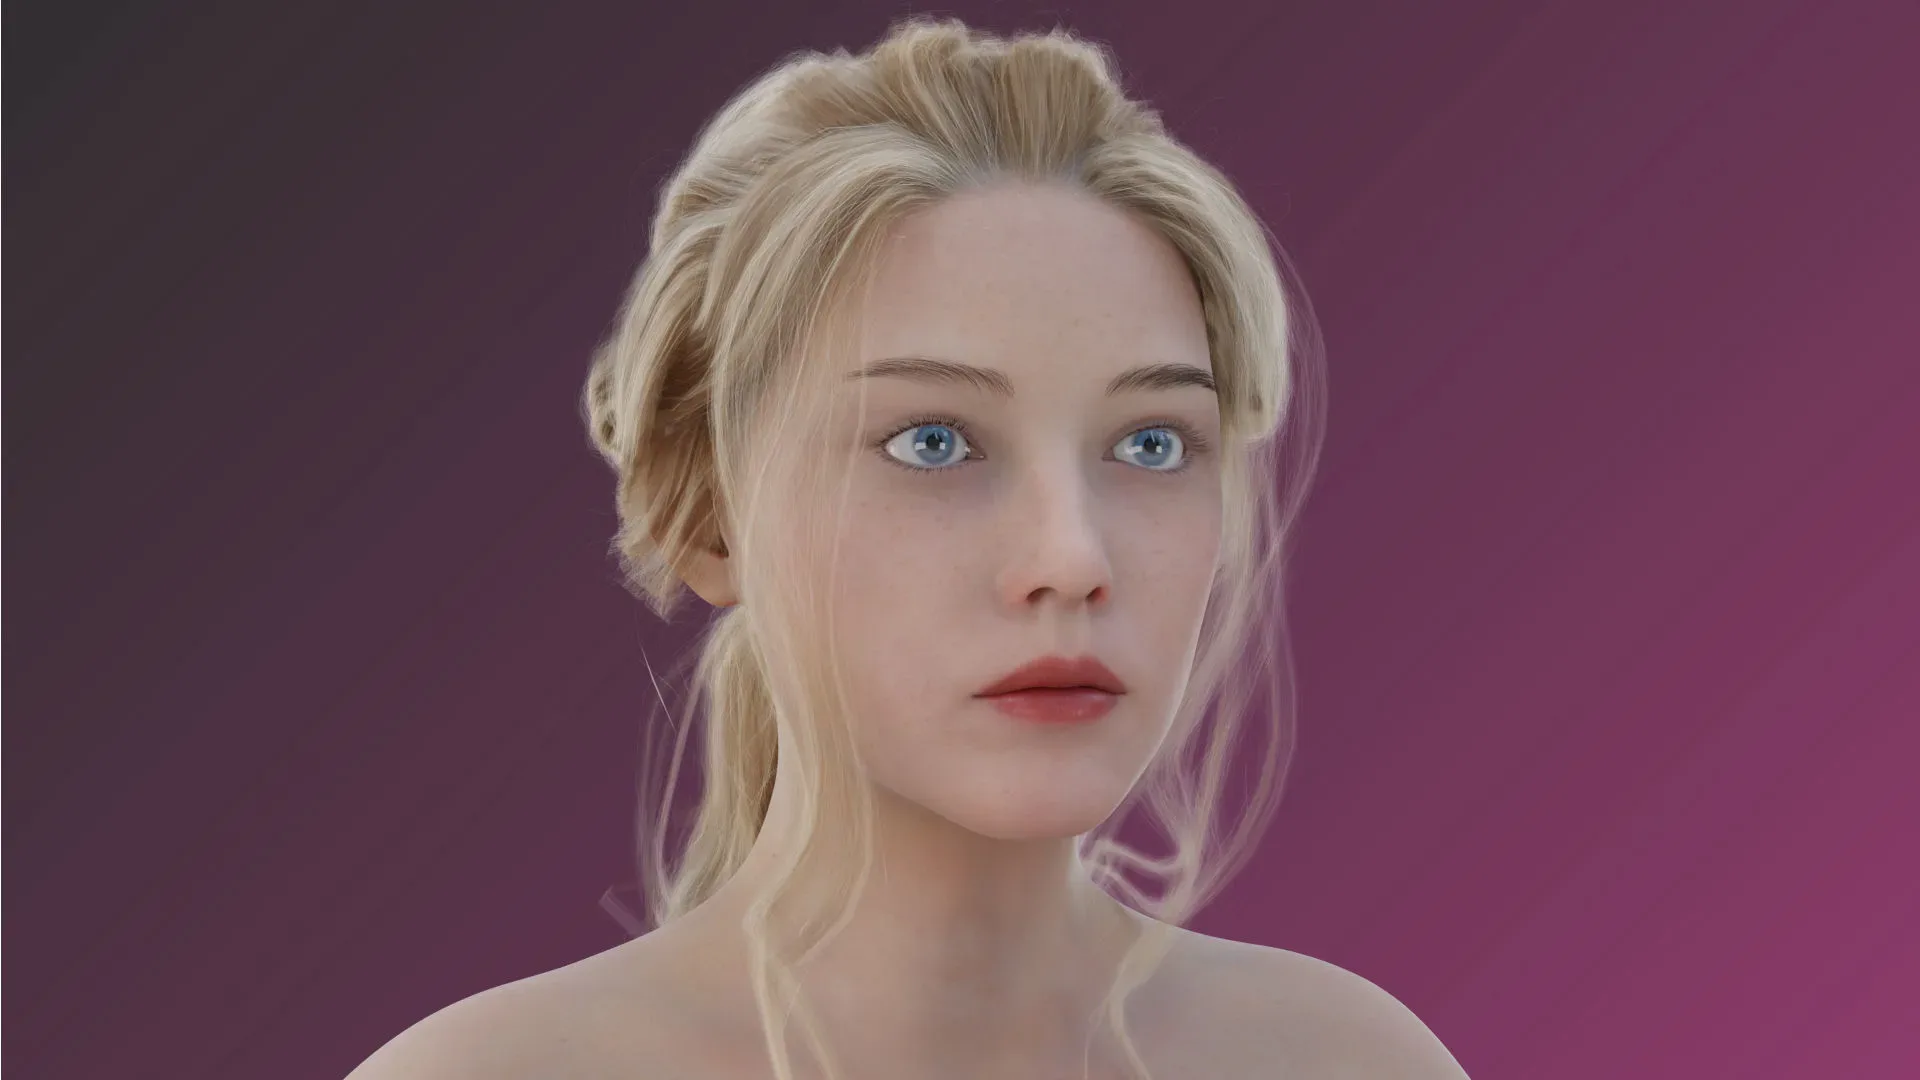 Sexy Hot Chick Blonde Girl with Ponytail Hairstyle - Rigged - 4K Textures